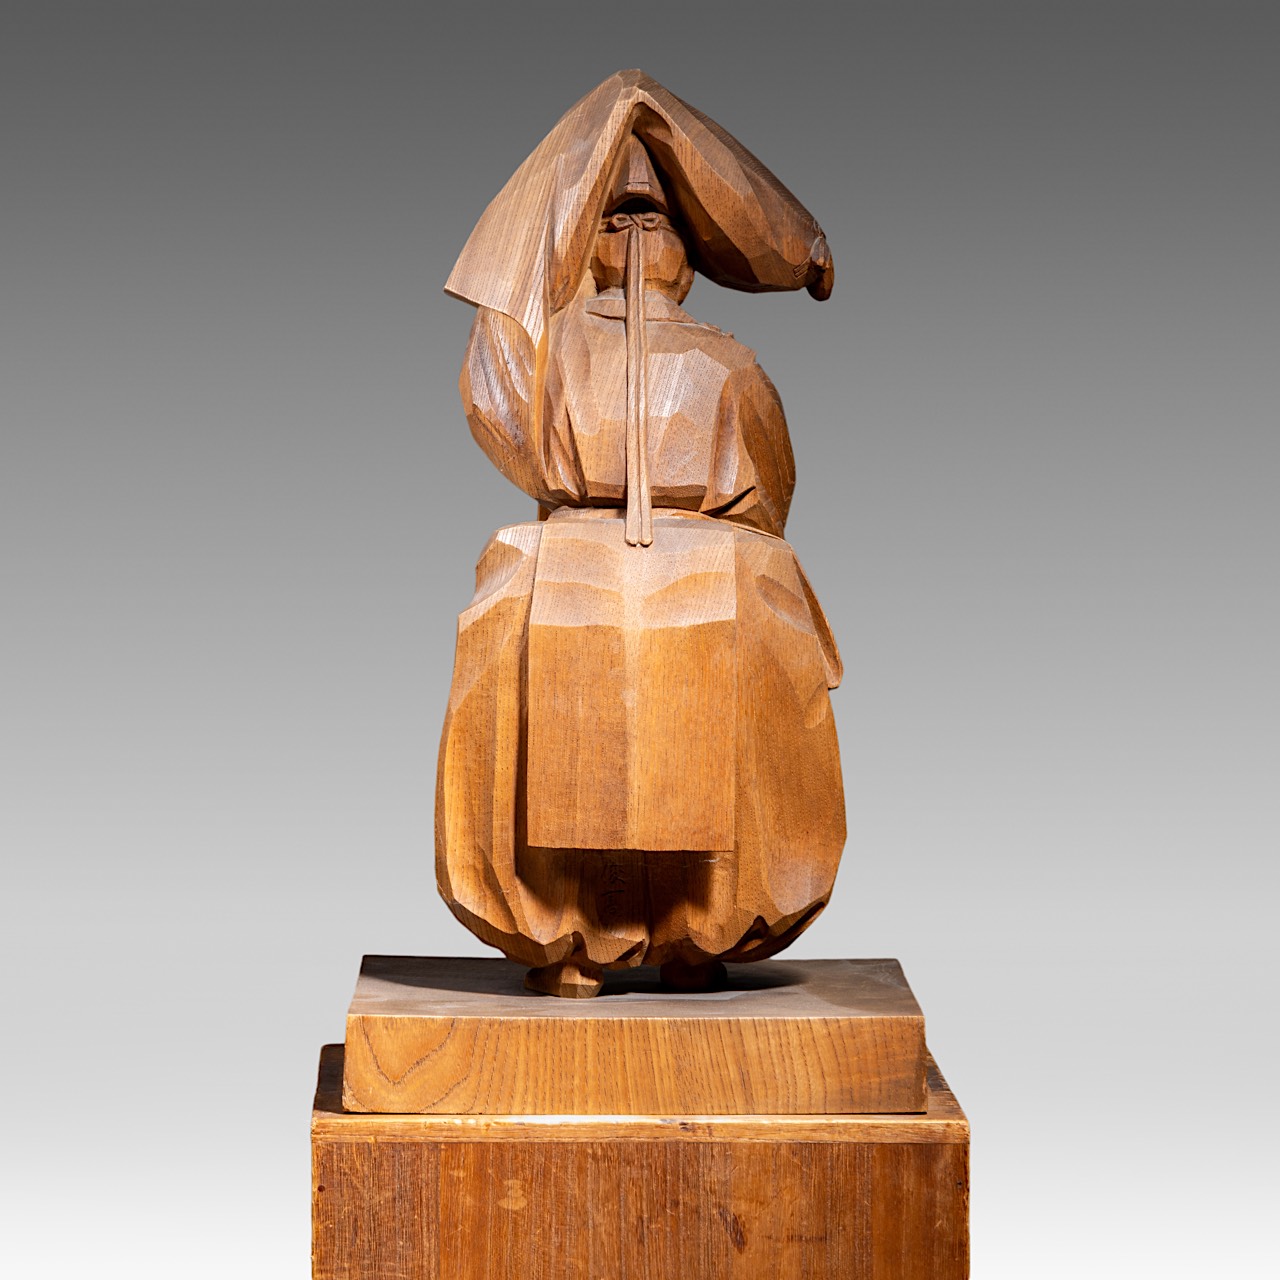 A Japanese cherrywood sculpture of a dancing man, signed Toshiaki Shimamura, total H 47 - 25,5 x 23 - Image 4 of 10